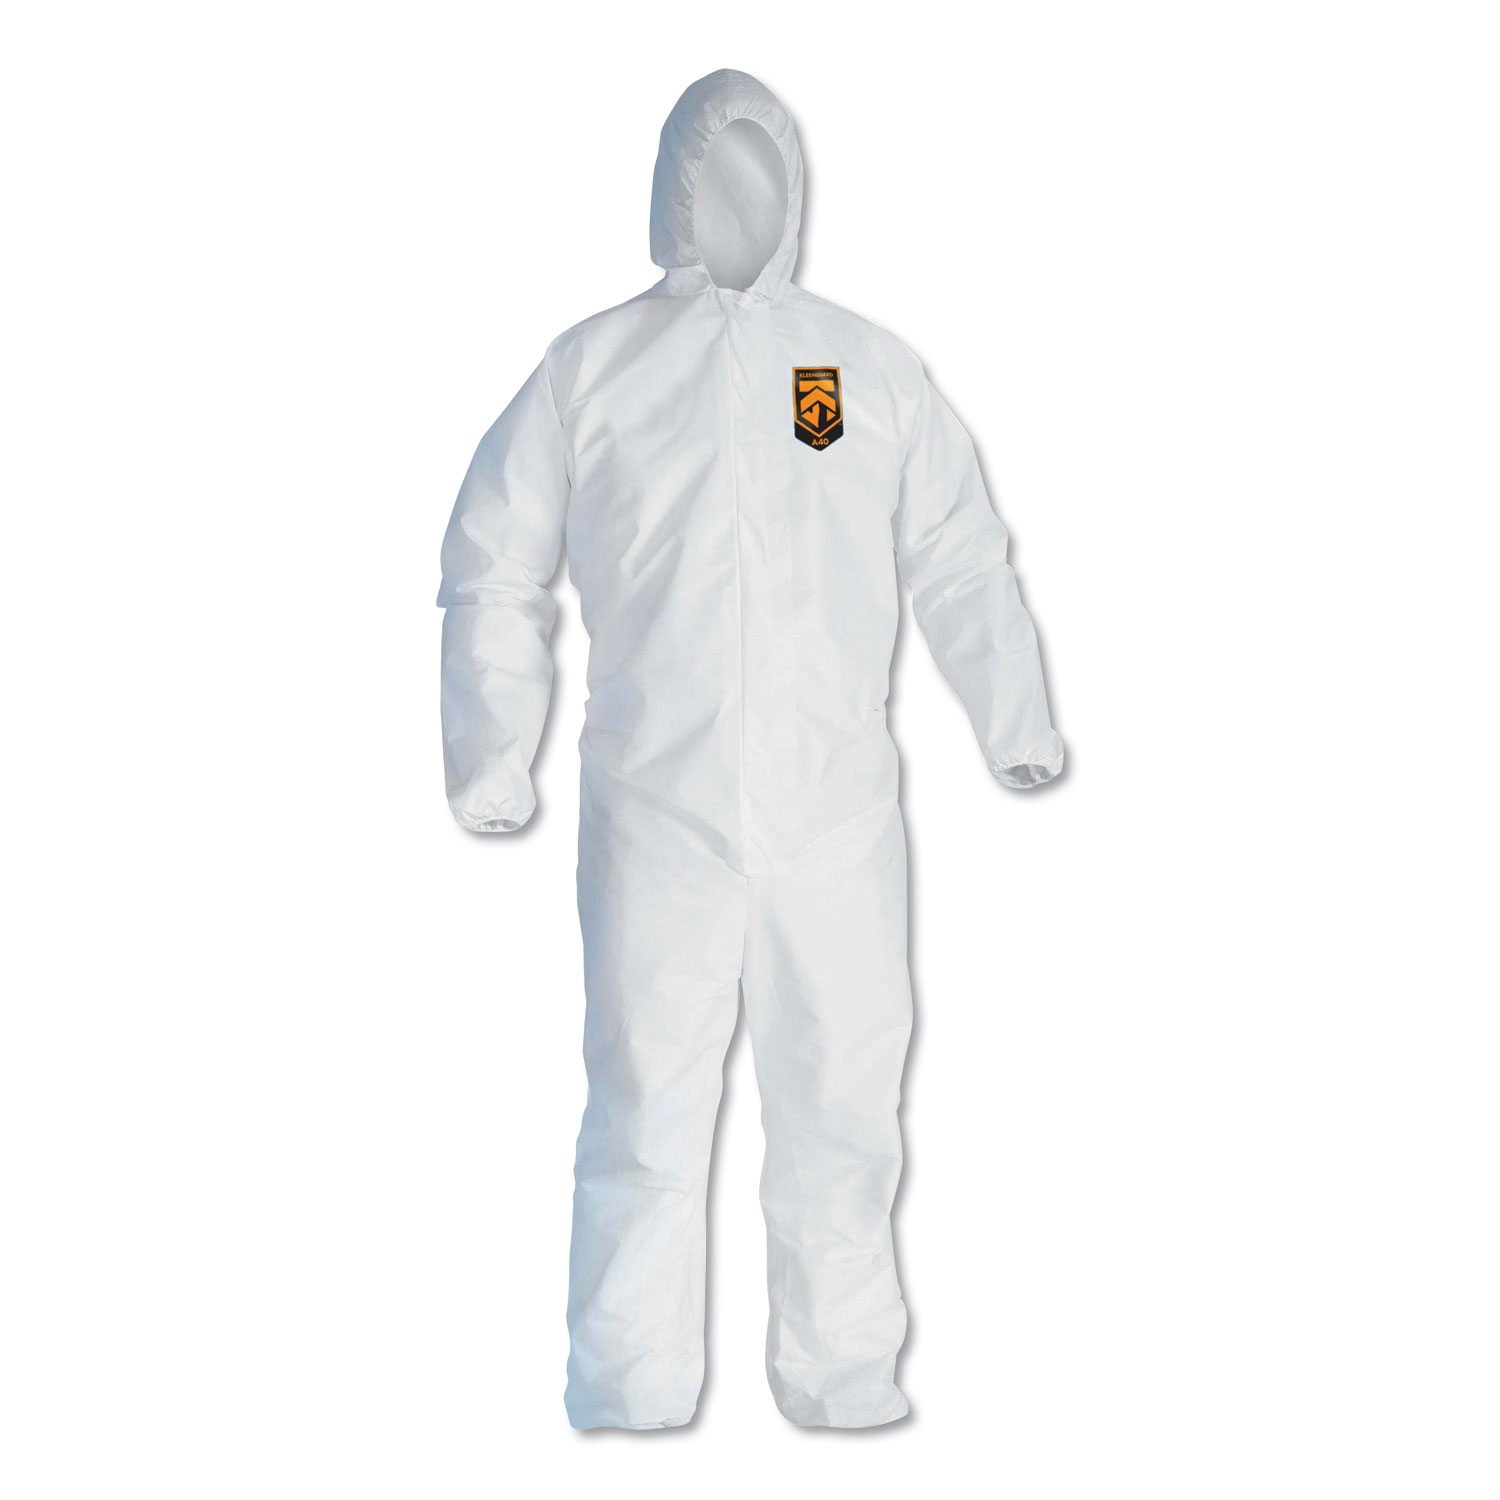  KleenGuard KCC 44323 A40 Elastic-Cuff & Ankle Hooded Coveralls, White, Large, 25/Carton (KCC44323) 